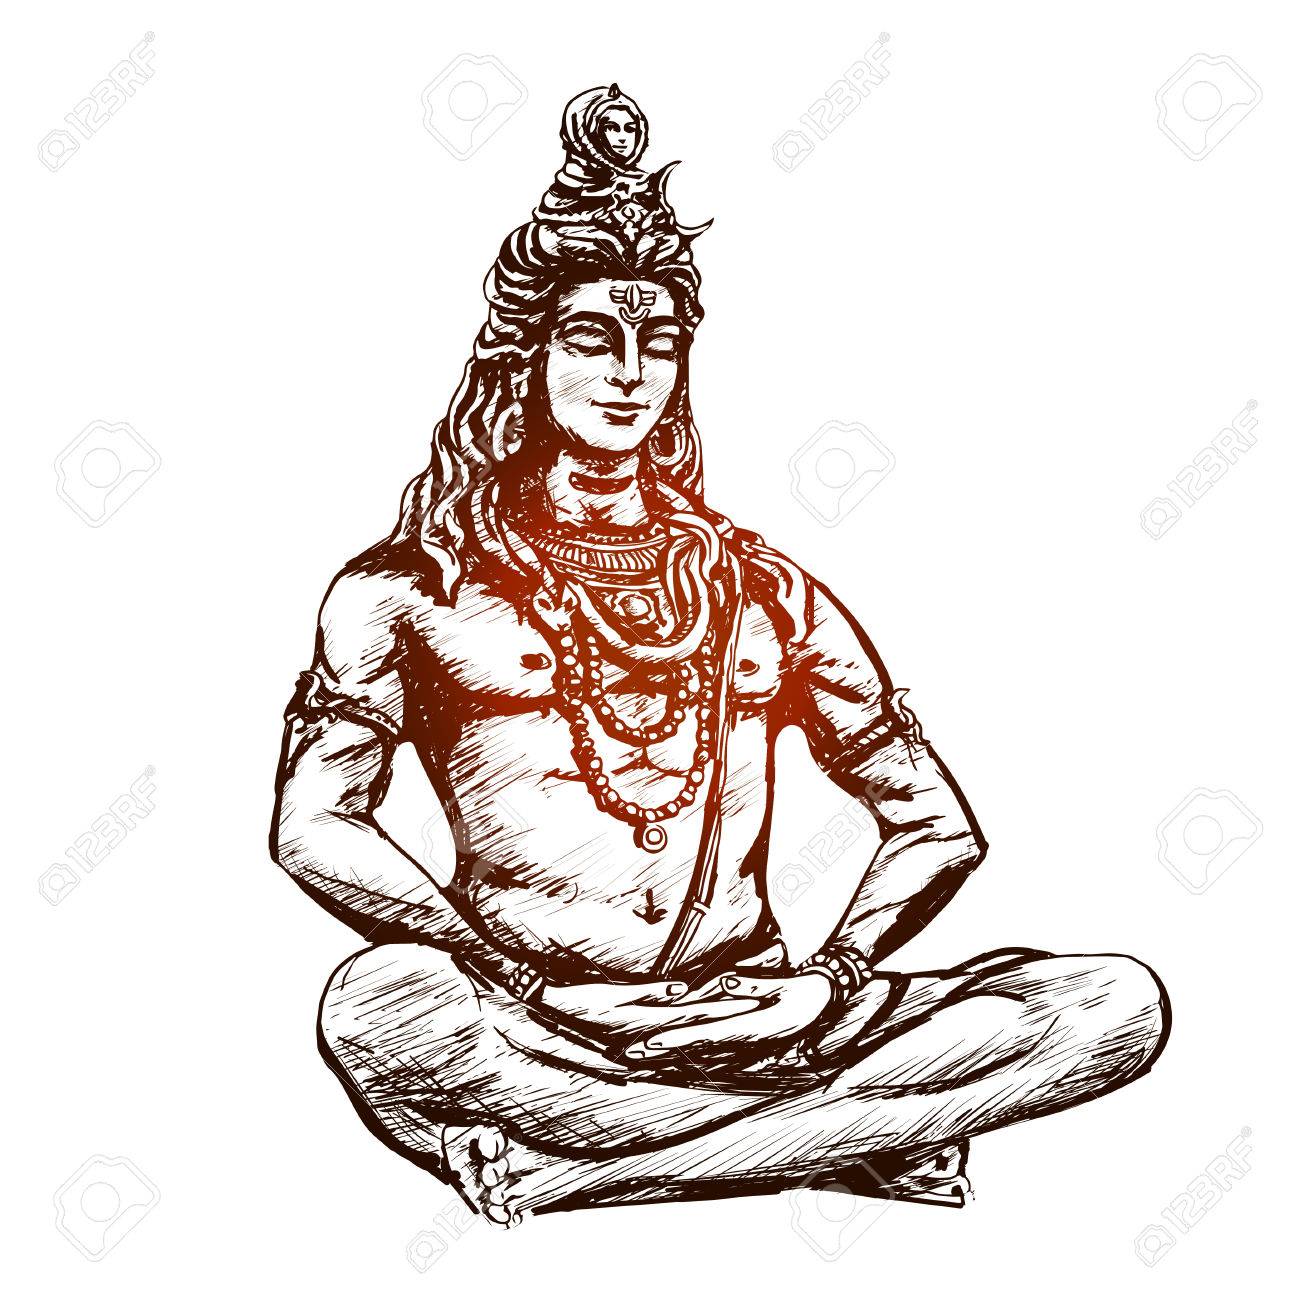 Lord Shiva in the lotus position and meditate. Om Namah Shivaya. Black and  white